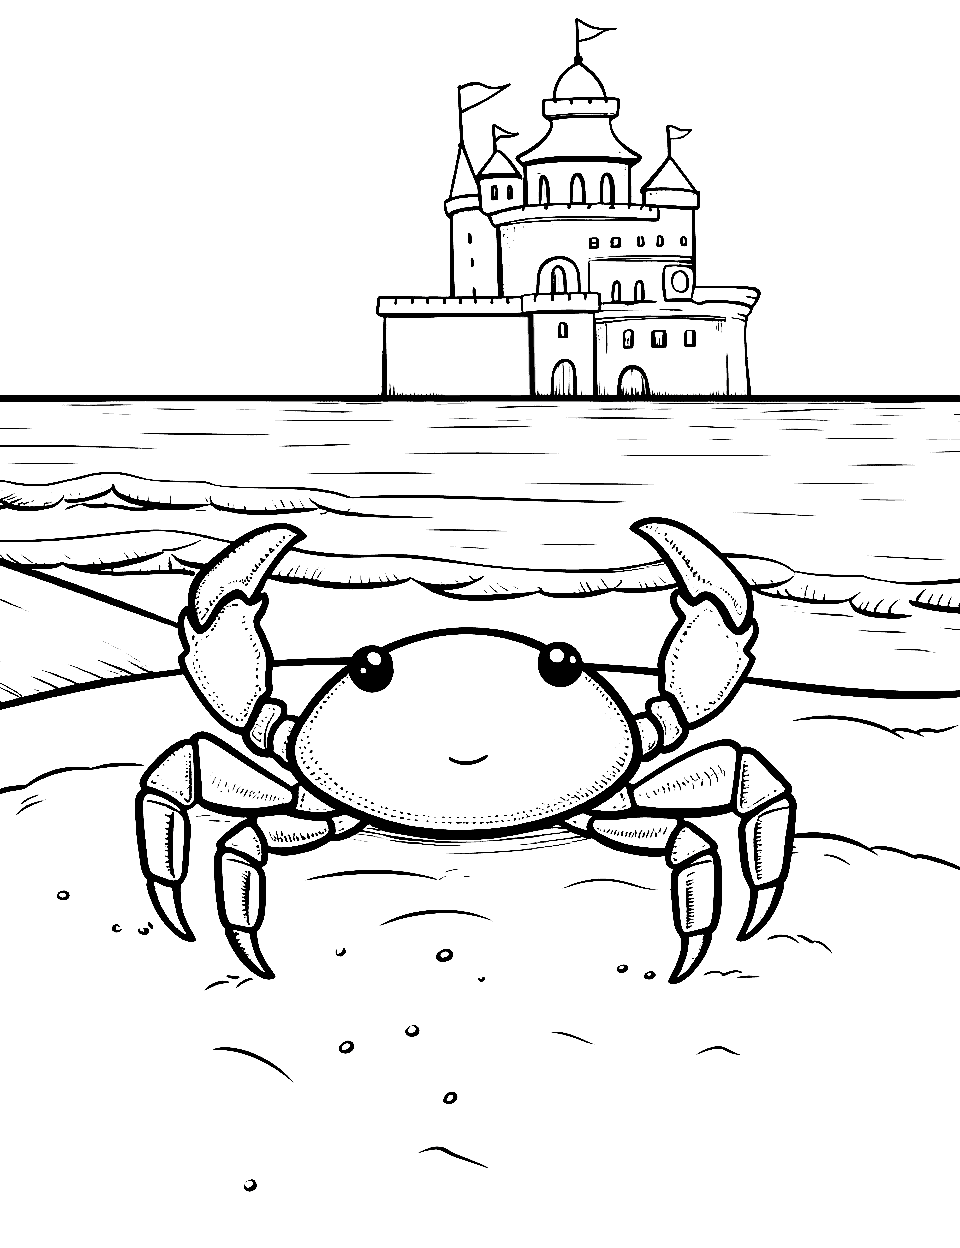 Crab and a Sand Castle Coloring Page - A small crab and a sand castle in the distance.